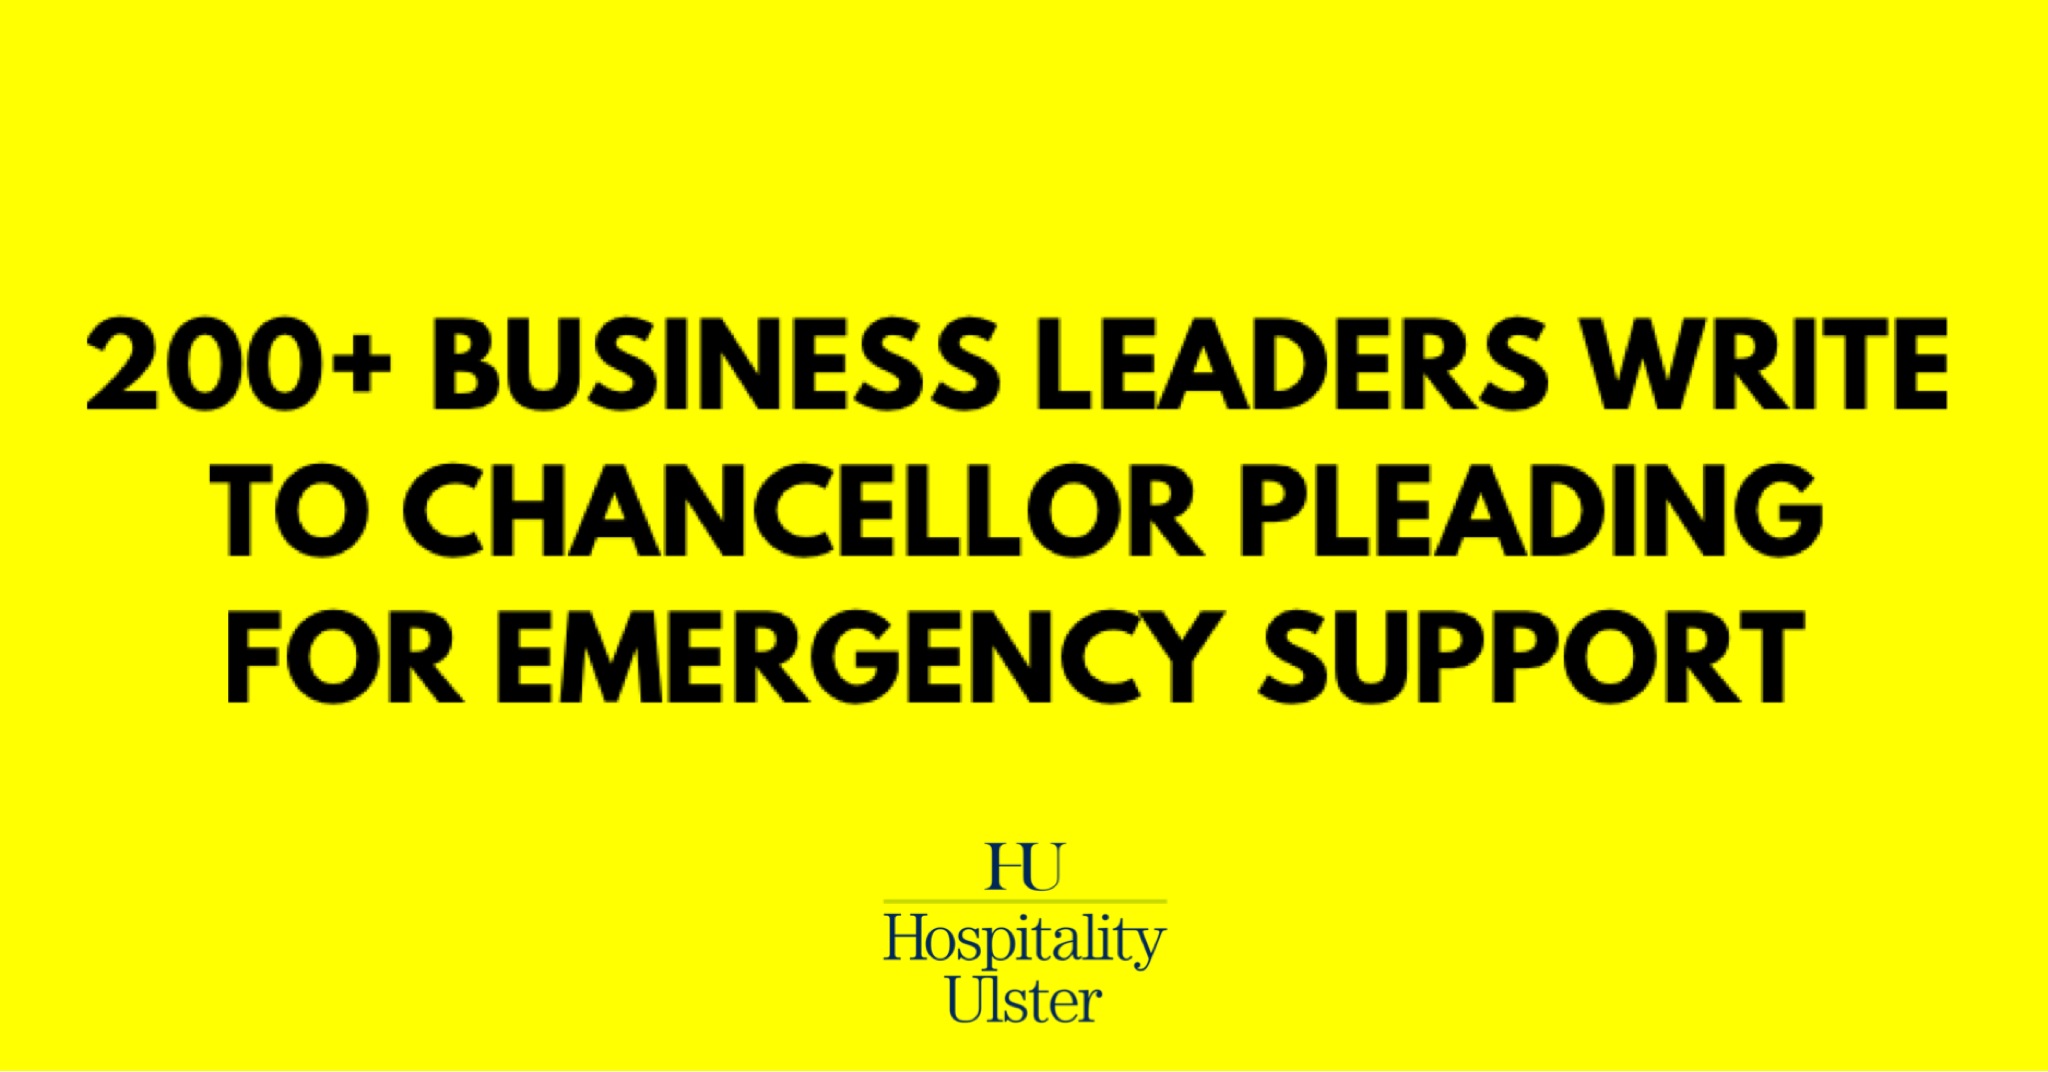 OVER 200 BUSINESS LEADERS WRITE TO CHANCELLOR PLEADING FOR EMERGENCY SUPPORT